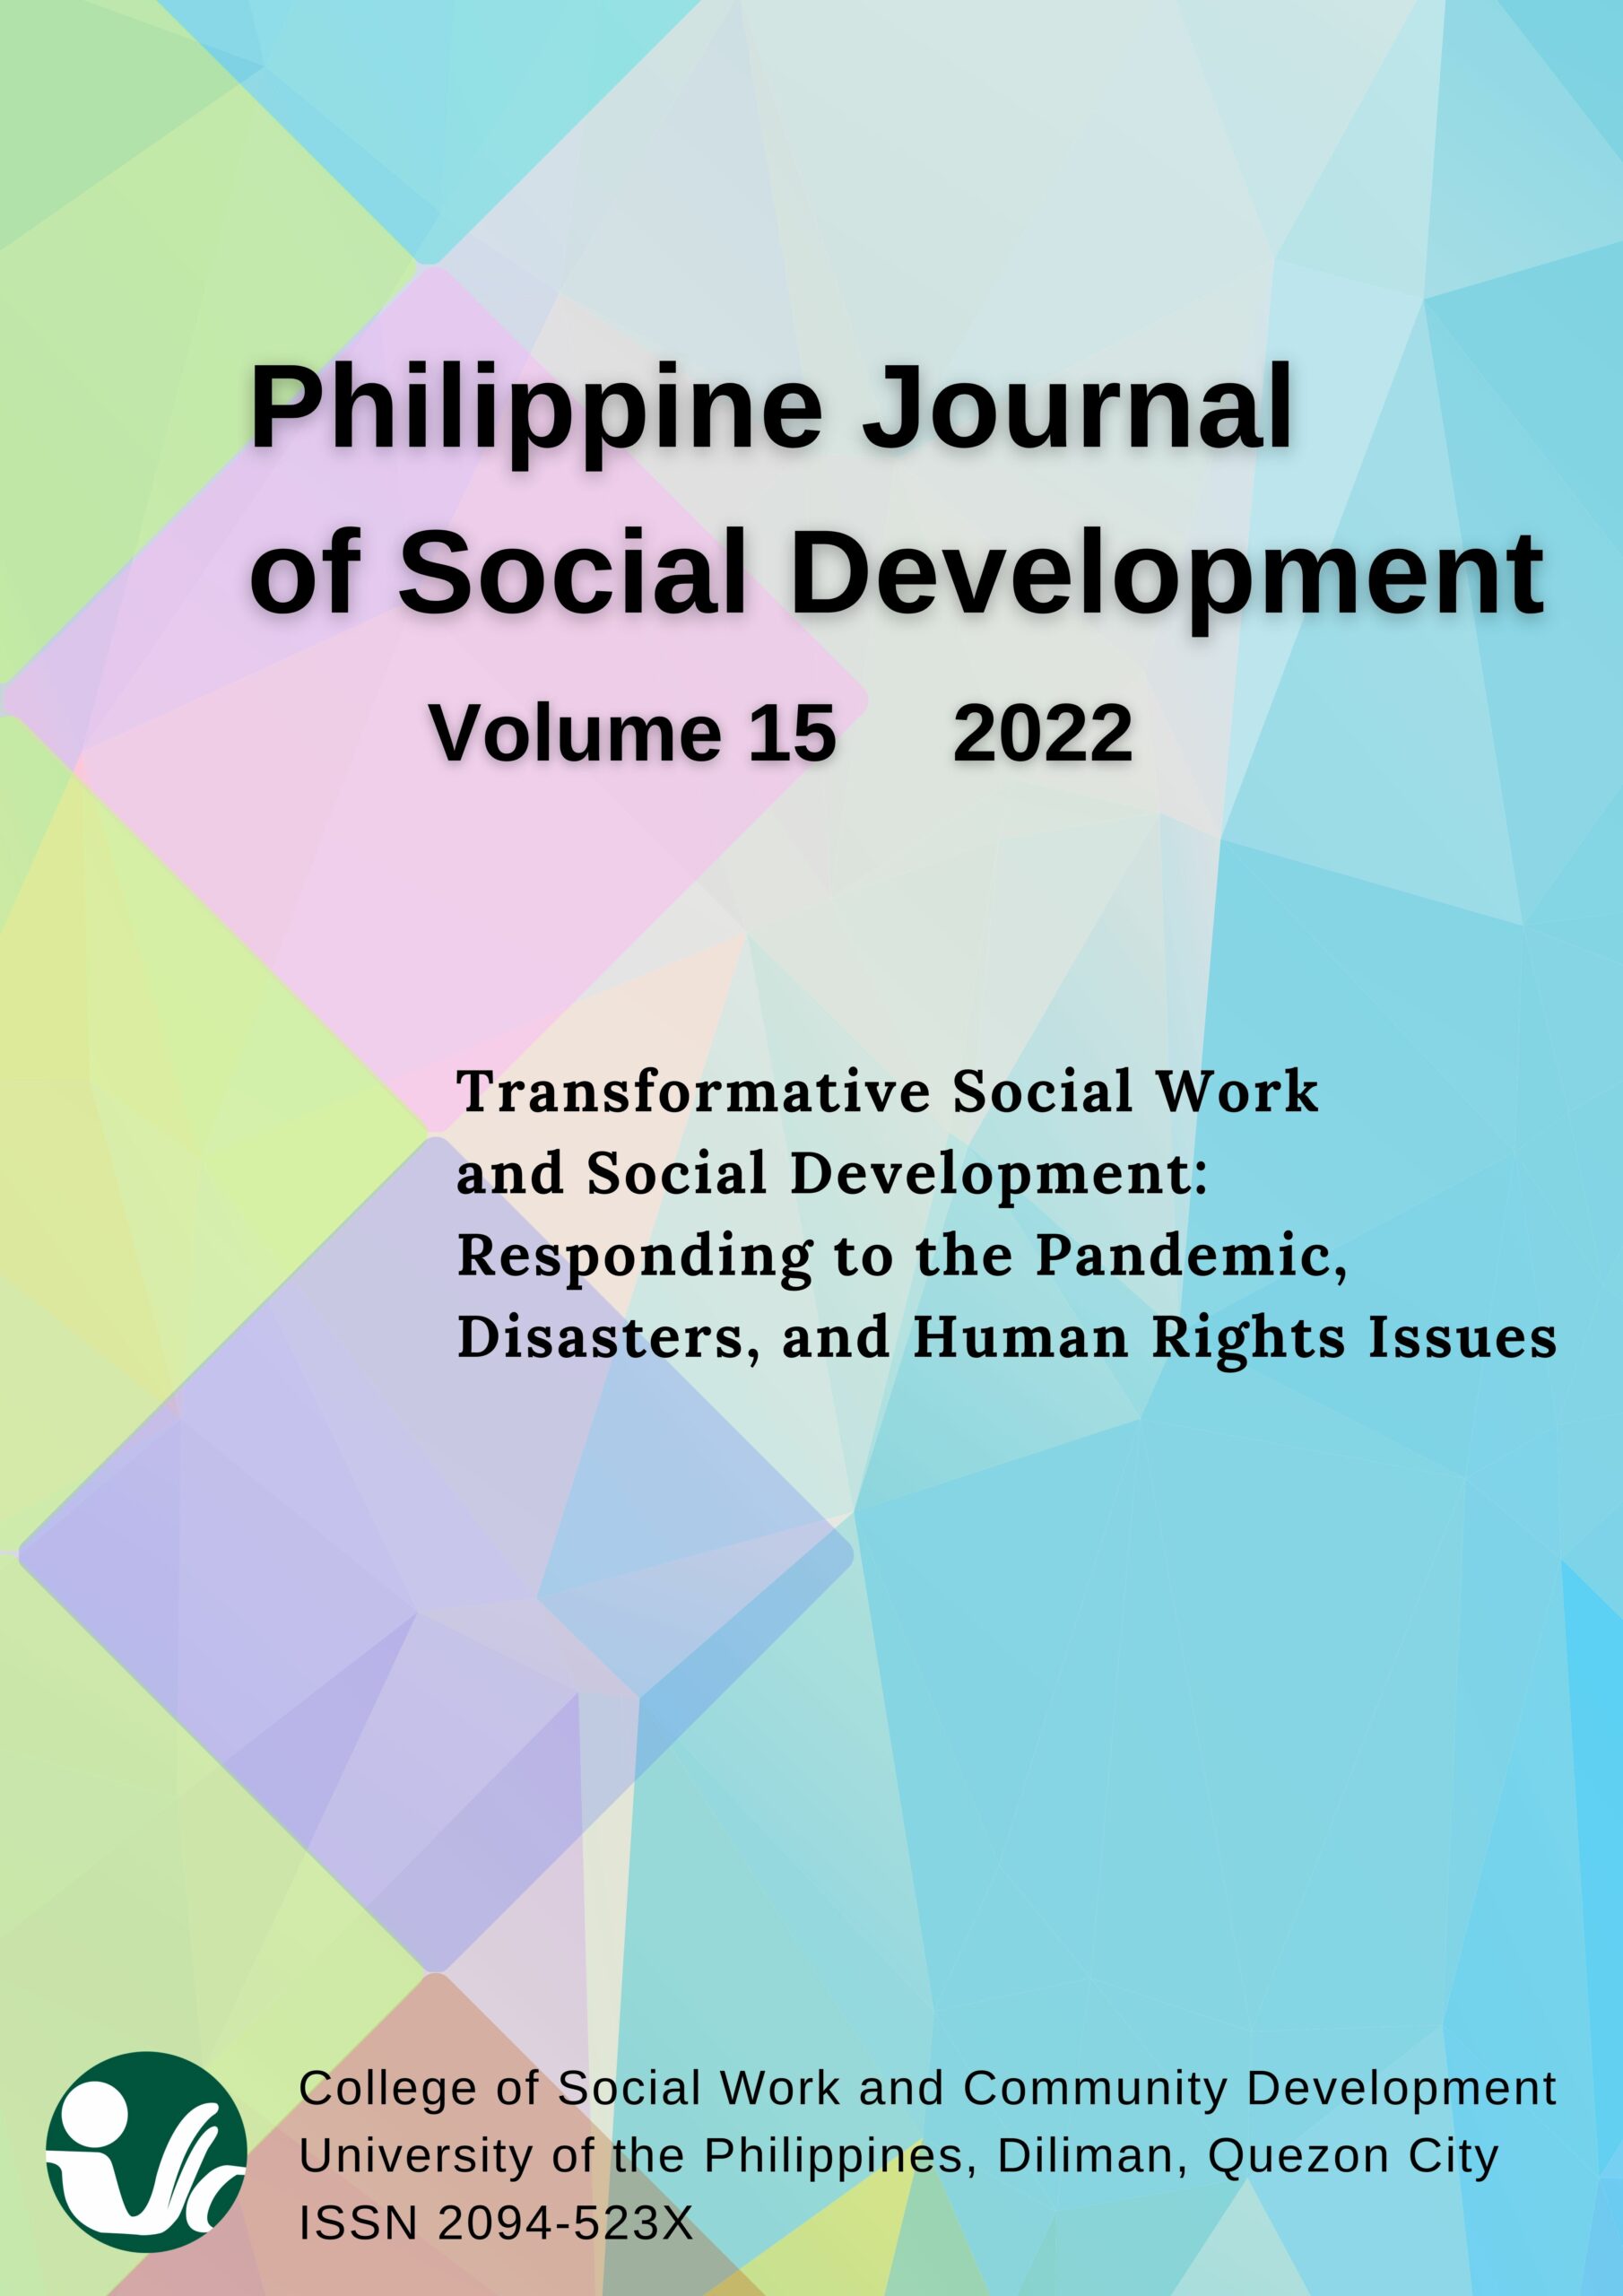 Download now! PJSD Vol. 15 2022 Transformative Social Work and Social Development: Responding to the Pandemic, Disasters, and Human Rights issues